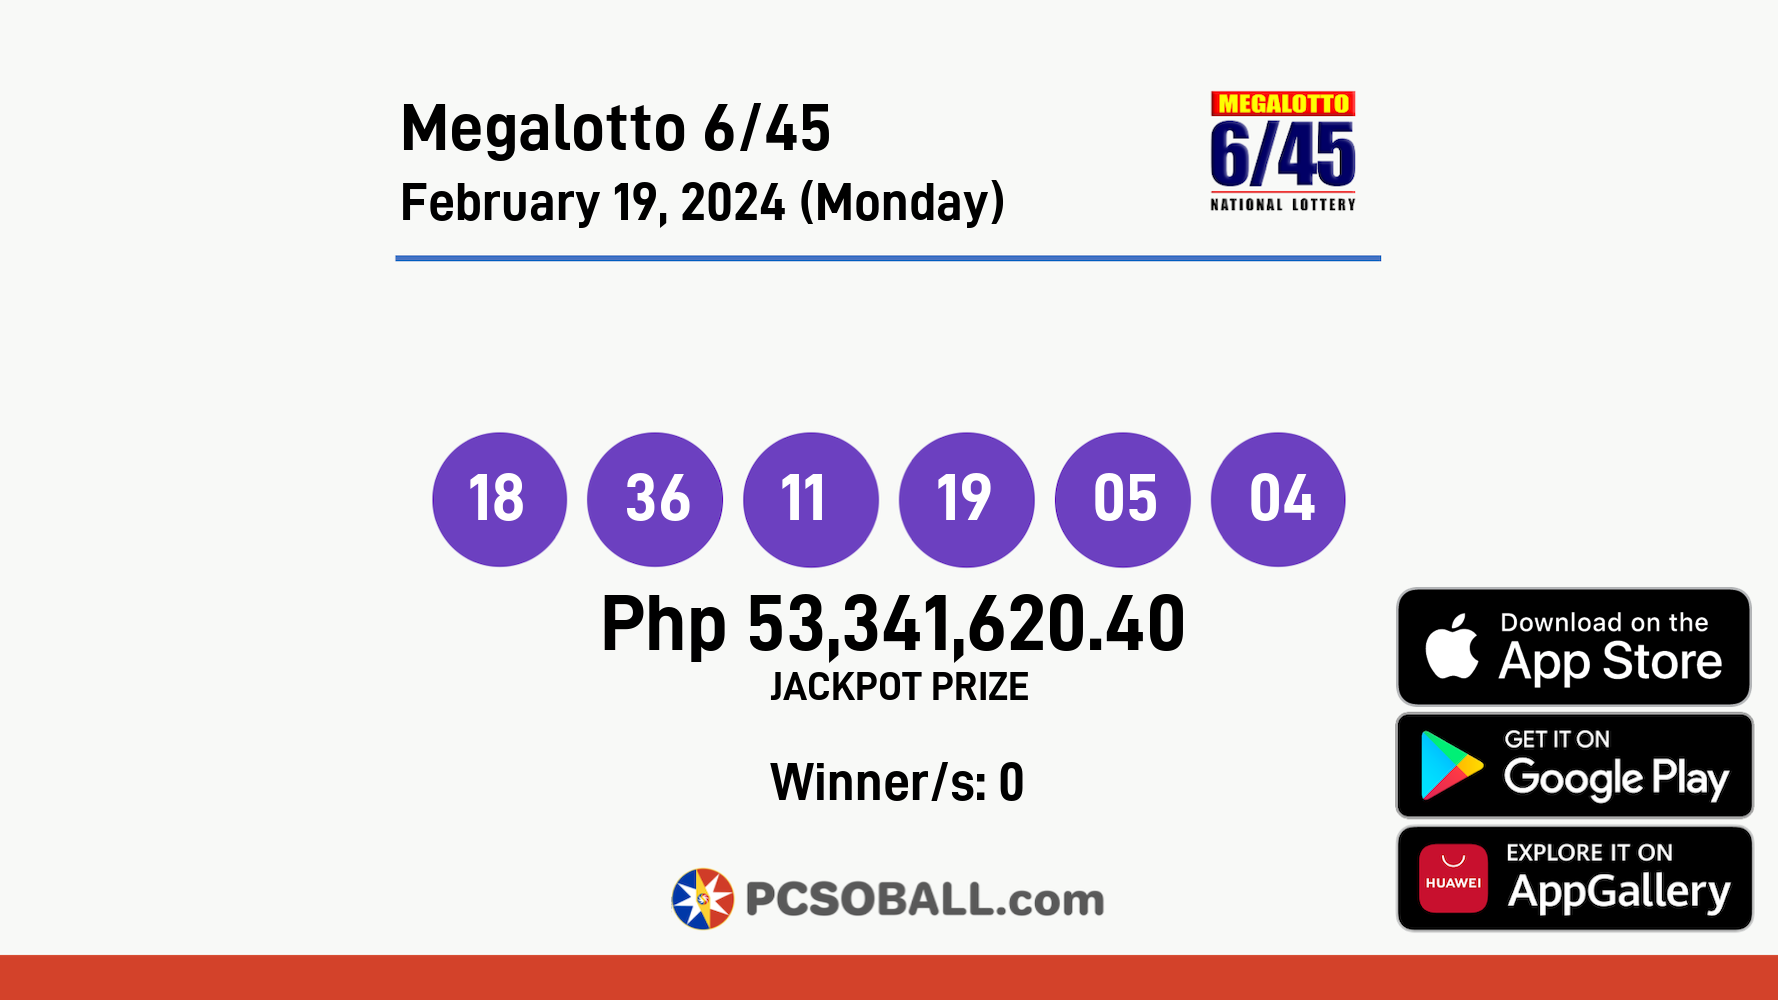 Megalotto 6/45 February 19, 2024 (Monday) Result